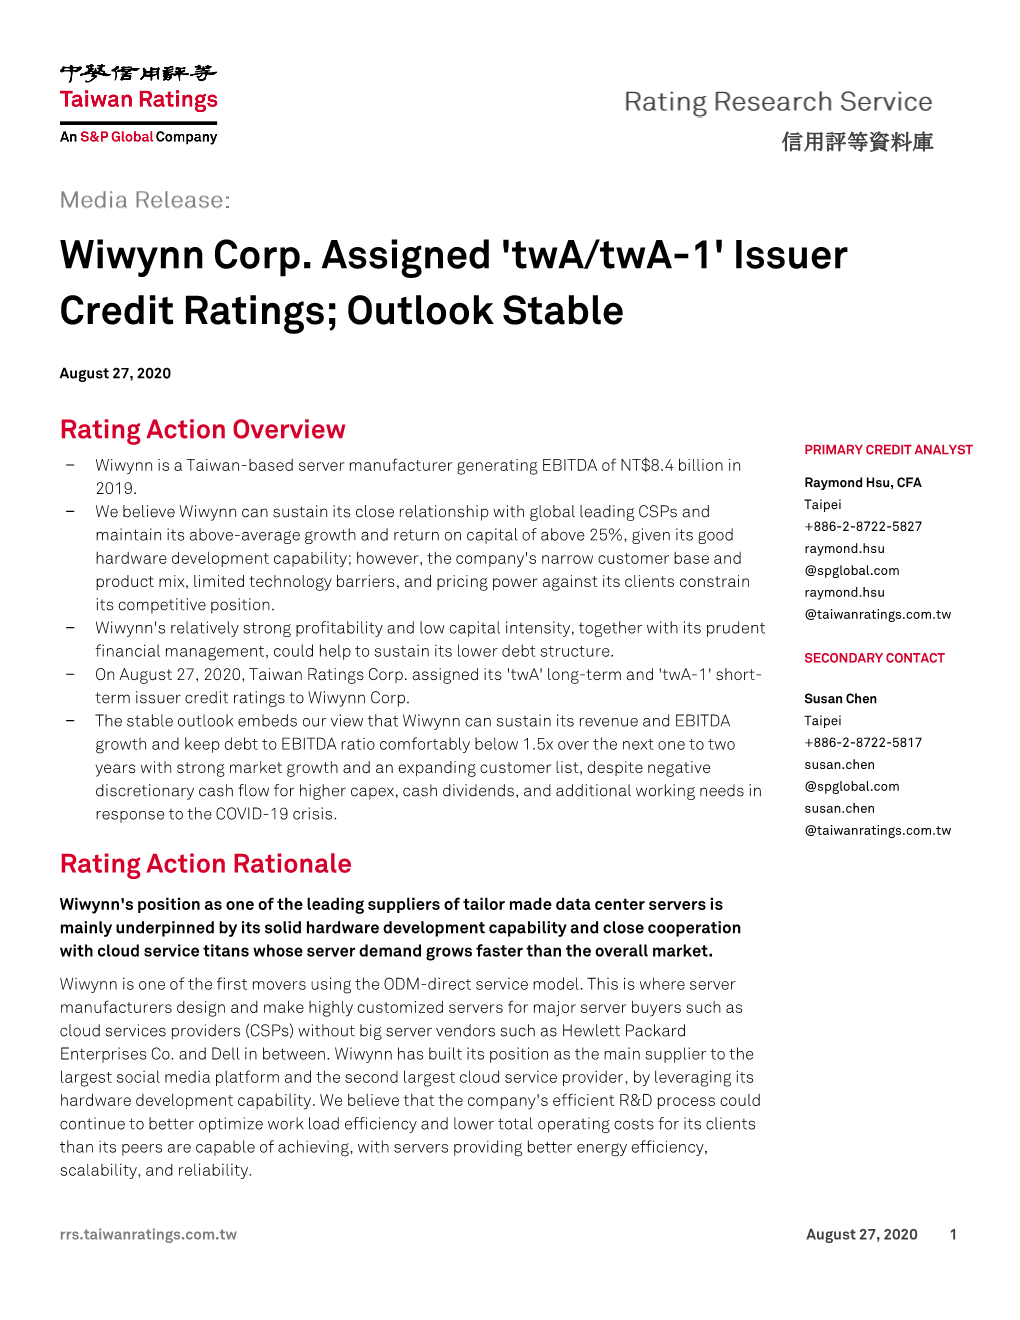 Issuer Credit Ratings; Outlook Stable